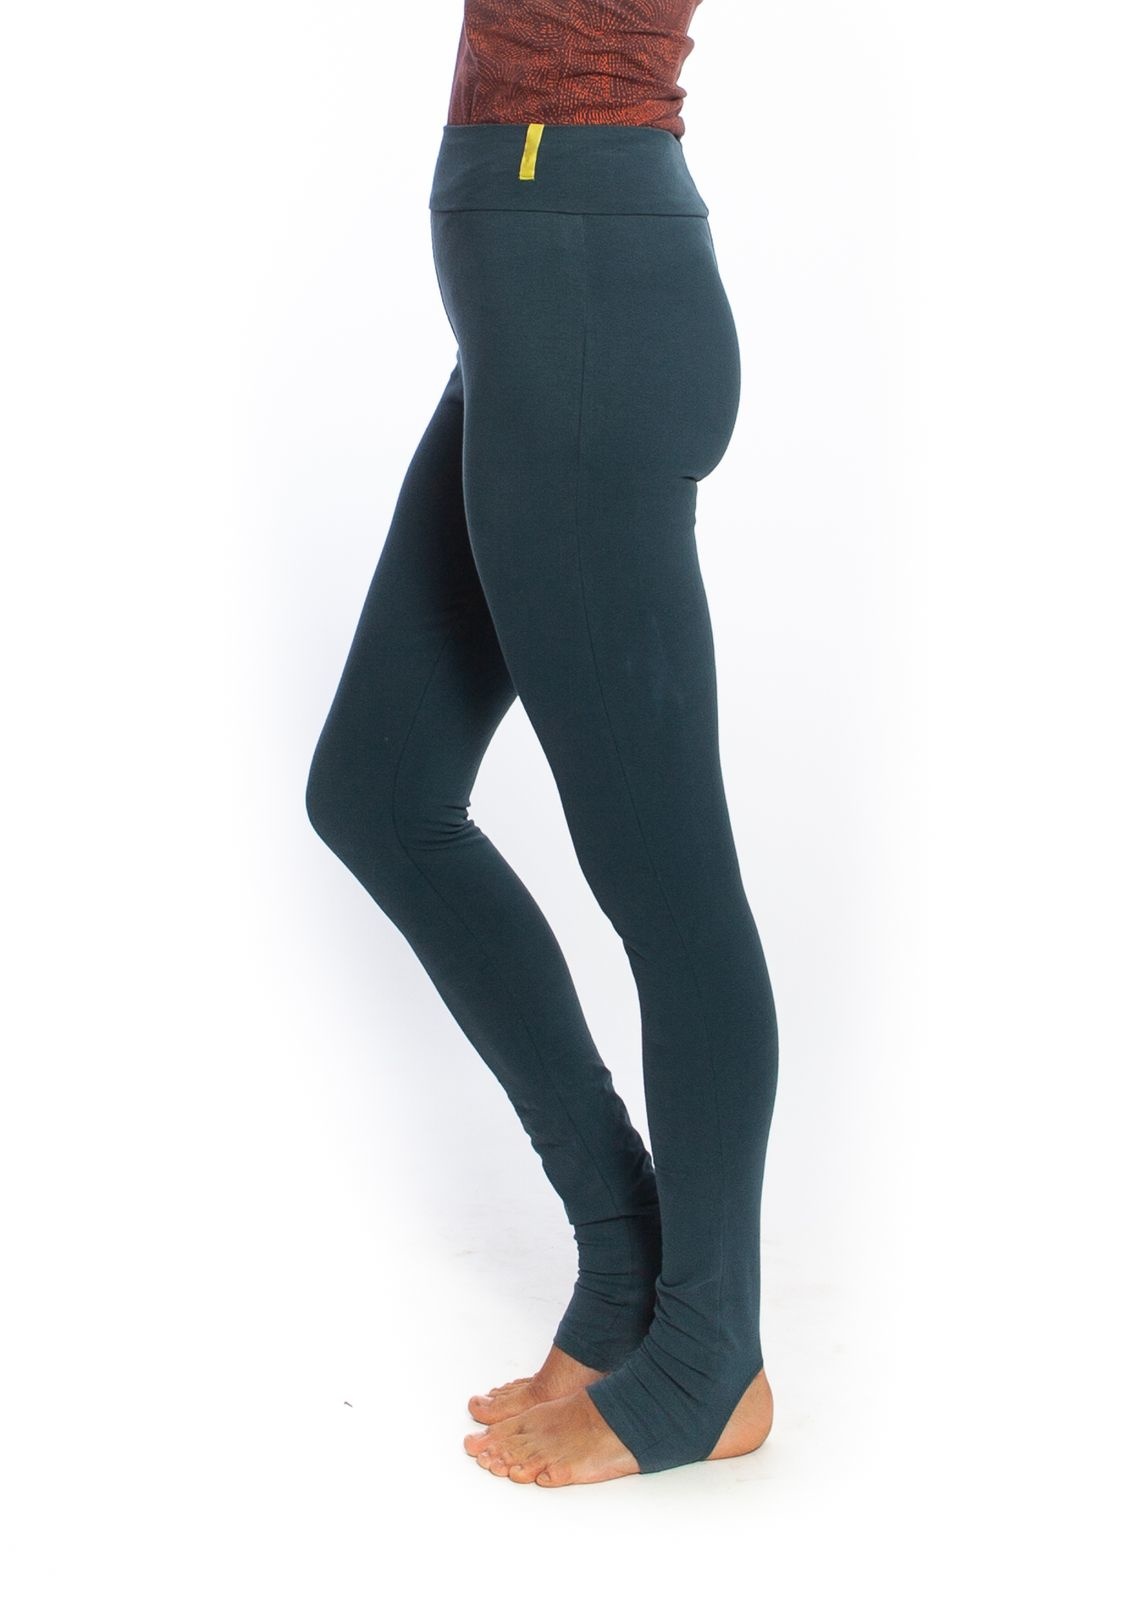 CAICJ98 Leggings For Women Lift Women's Extra Long Yoga Leggings with  Pockets Over The Heel Stacked Legging Barre Dance Pants D,One Size -  Walmart.com